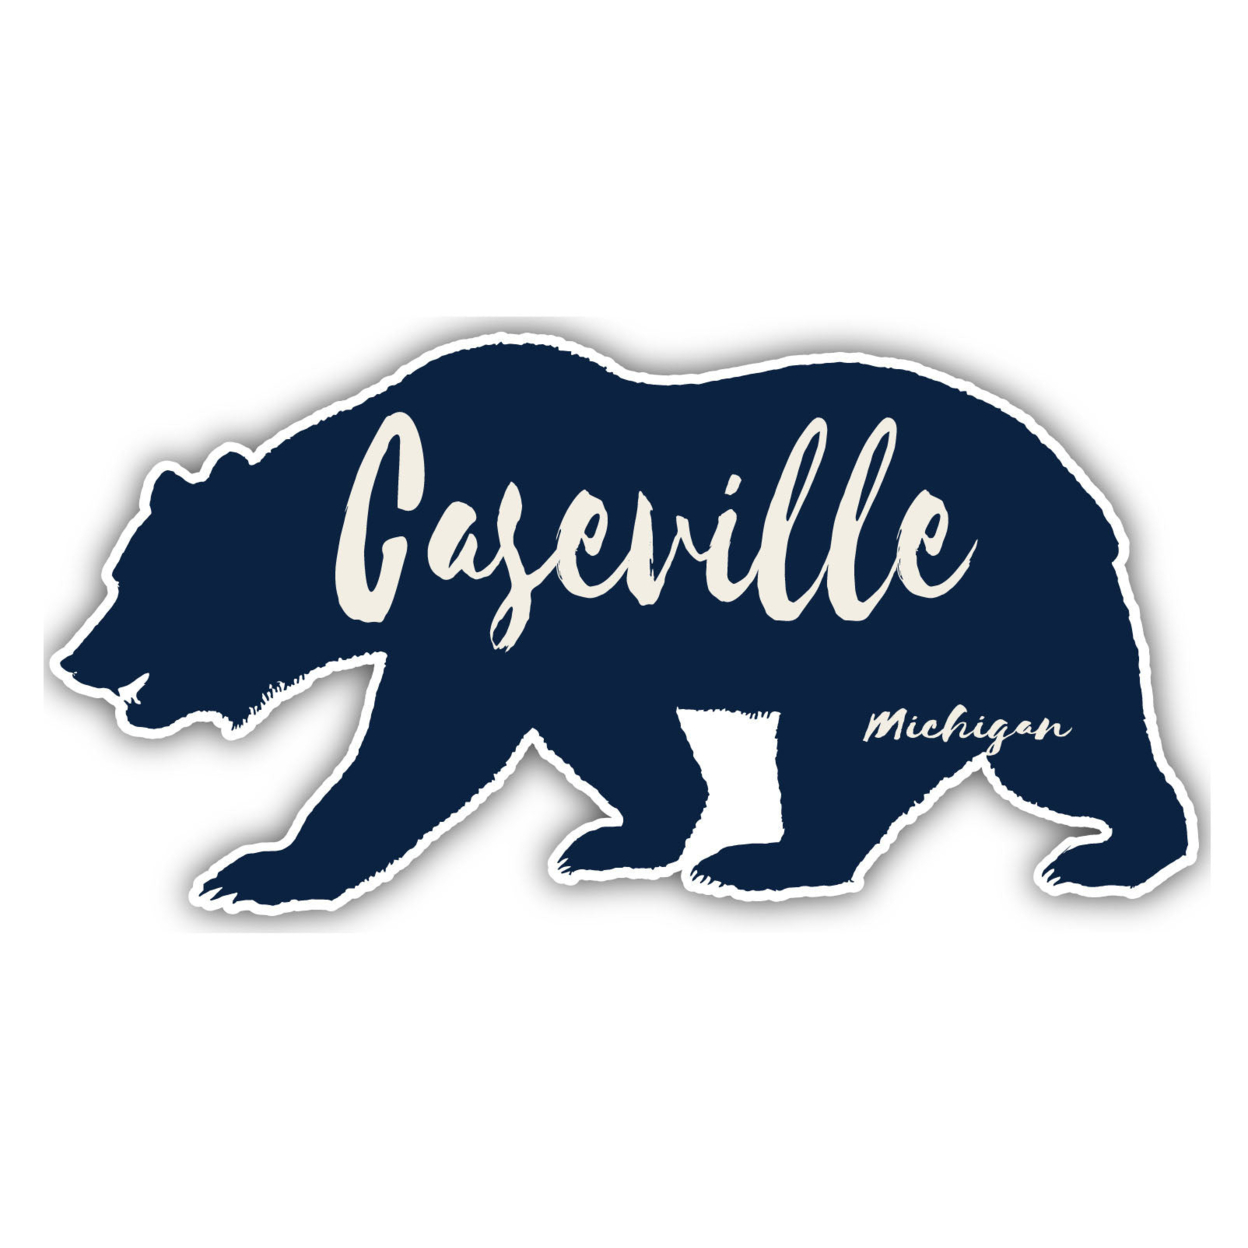 Caseville Michigan Souvenir Decorative Stickers (Choose Theme And Size) - 4-Pack, 12-Inch, Great Outdoors